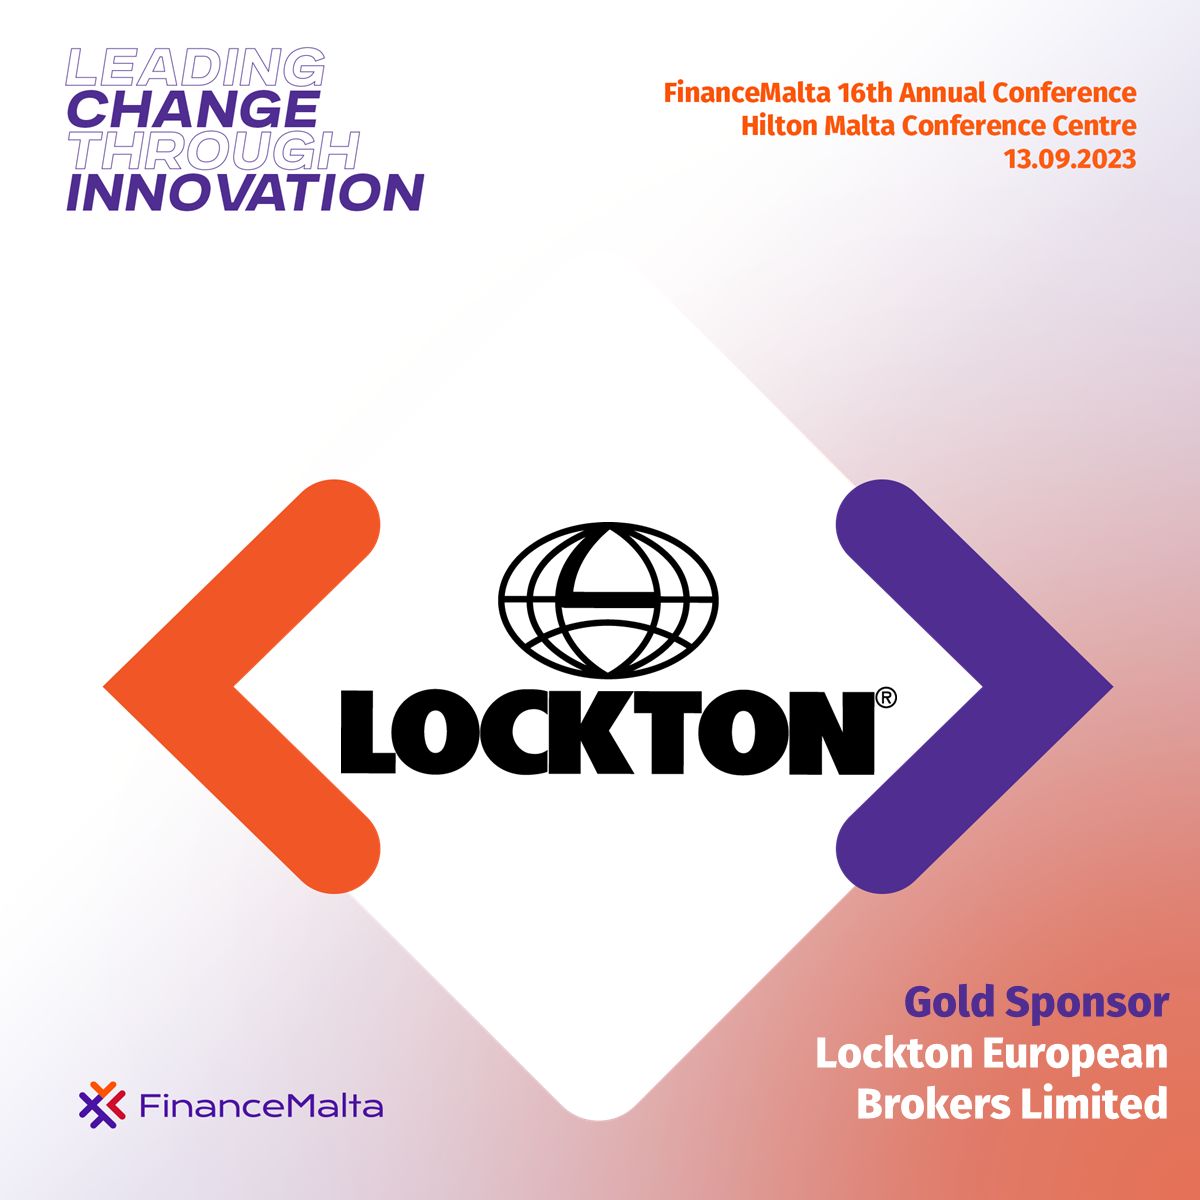 ++SPONSOR ANNOUNCEMENT++
Lockton European Brokers Limited is an official Gold Sponsor for the FinanceMalta 16th Annual Conference.

Buy tickets 👉 fmannualconference.org

#FM16AC #GoldSponsor